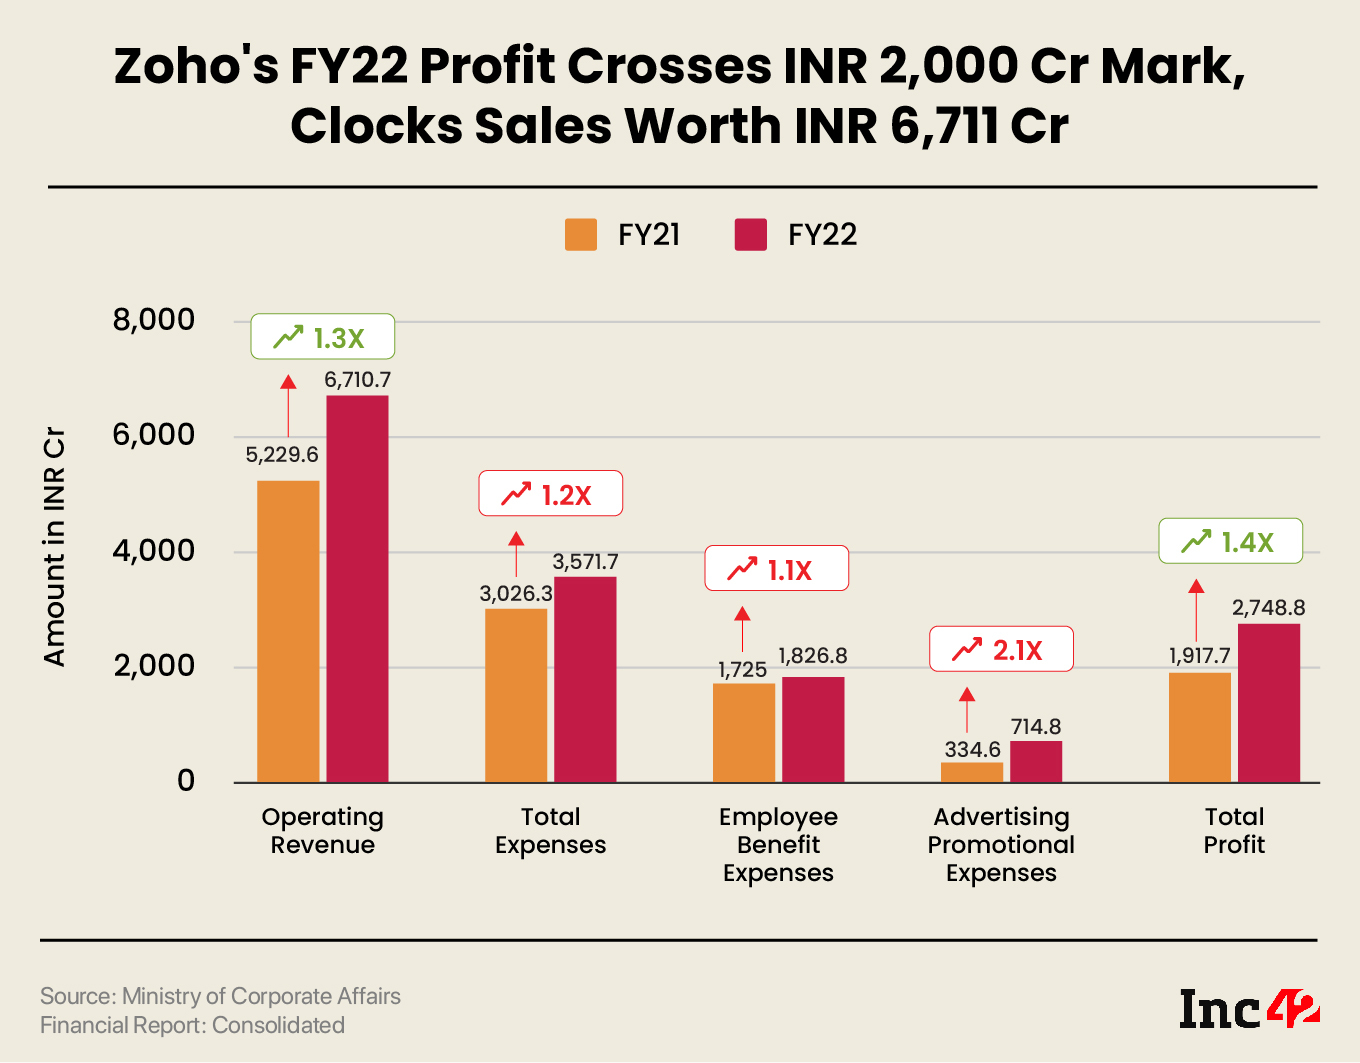 Sridhar Vembu-Led Zoho’s Profit Zooms 43% To INR 2,749 Cr In FY22, Sales Rise 28%